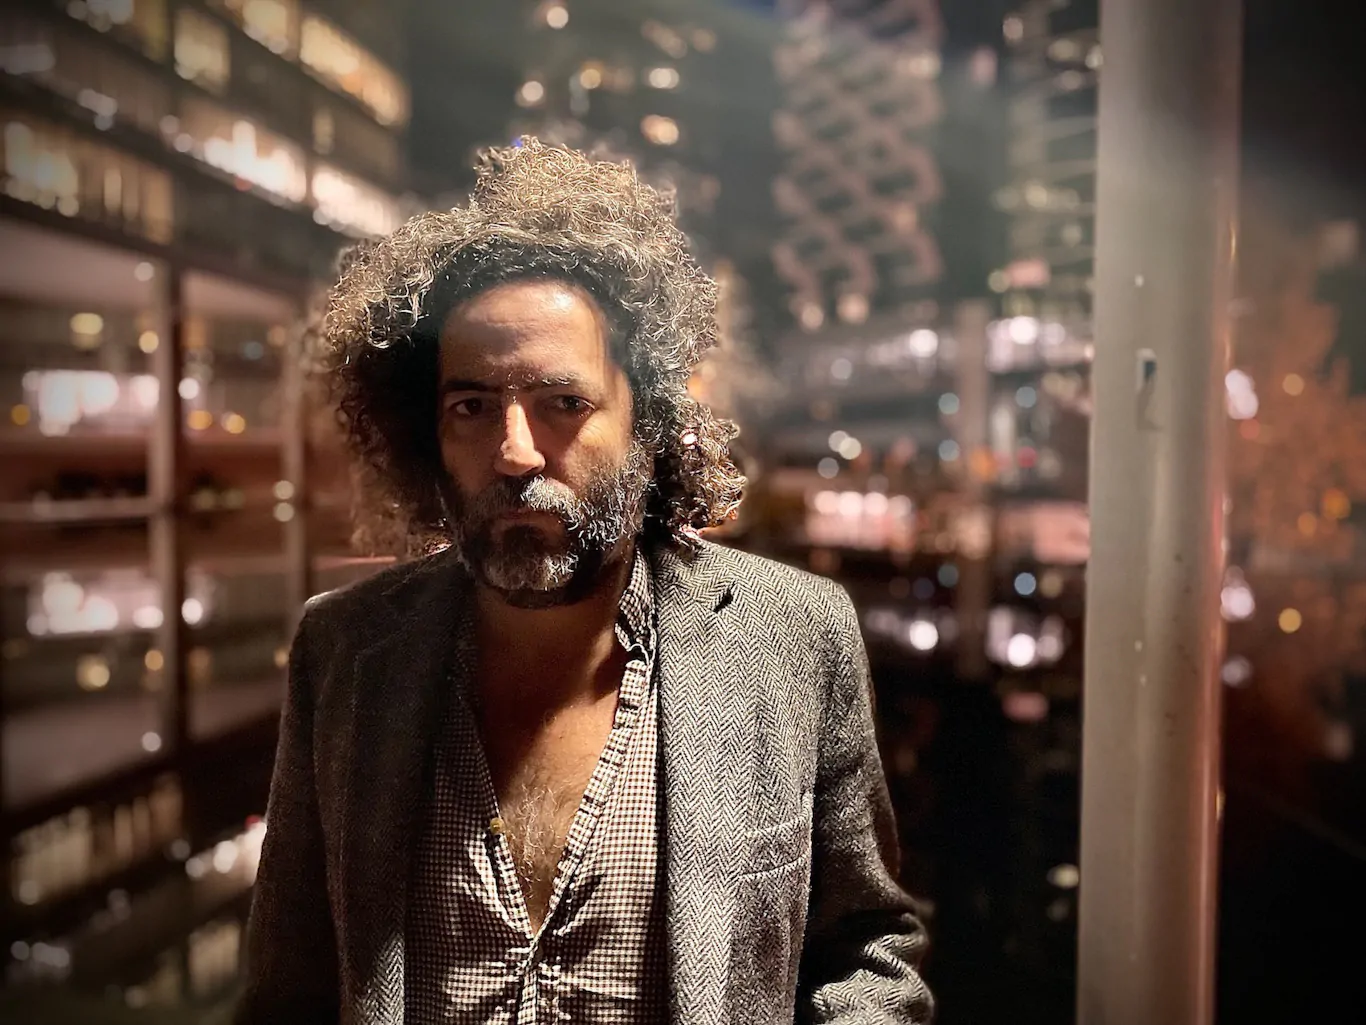 Destroyer announces new LP ‘LABYRINTHITIS’ out 25th March & shares video for first single ‘Tintoretto, It’s for You’